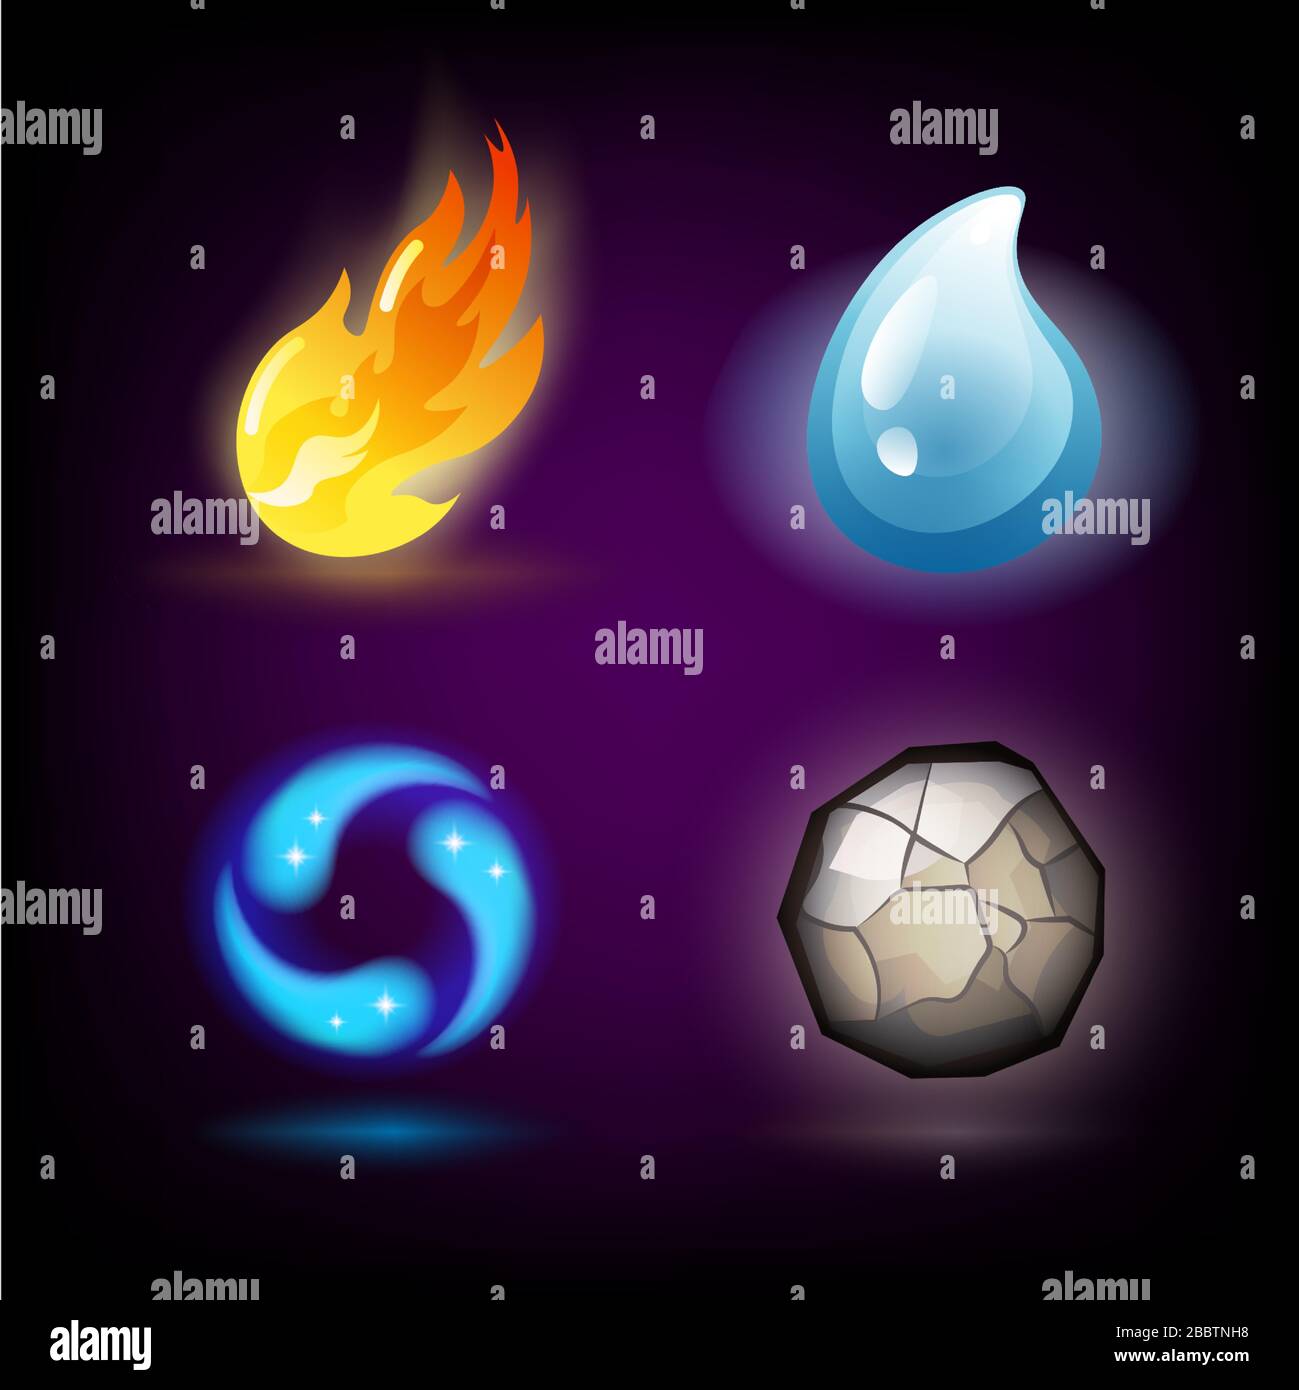 Illustrations Of Four Natural Elements Of Fire, Water, Wind And